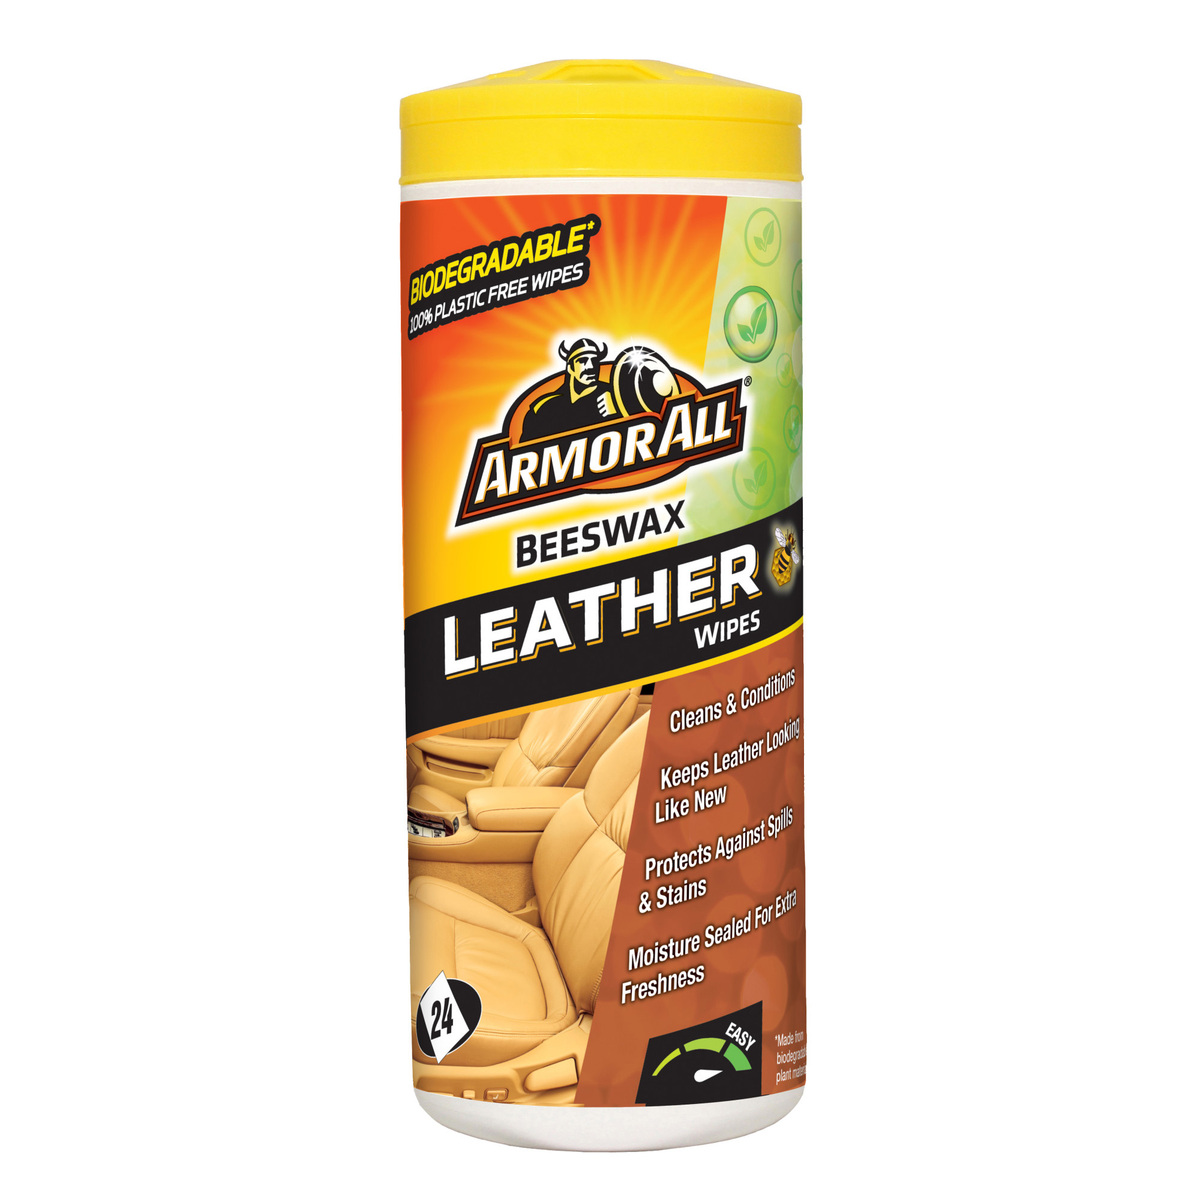 Armor All Leather Wipes, 24 Pcs